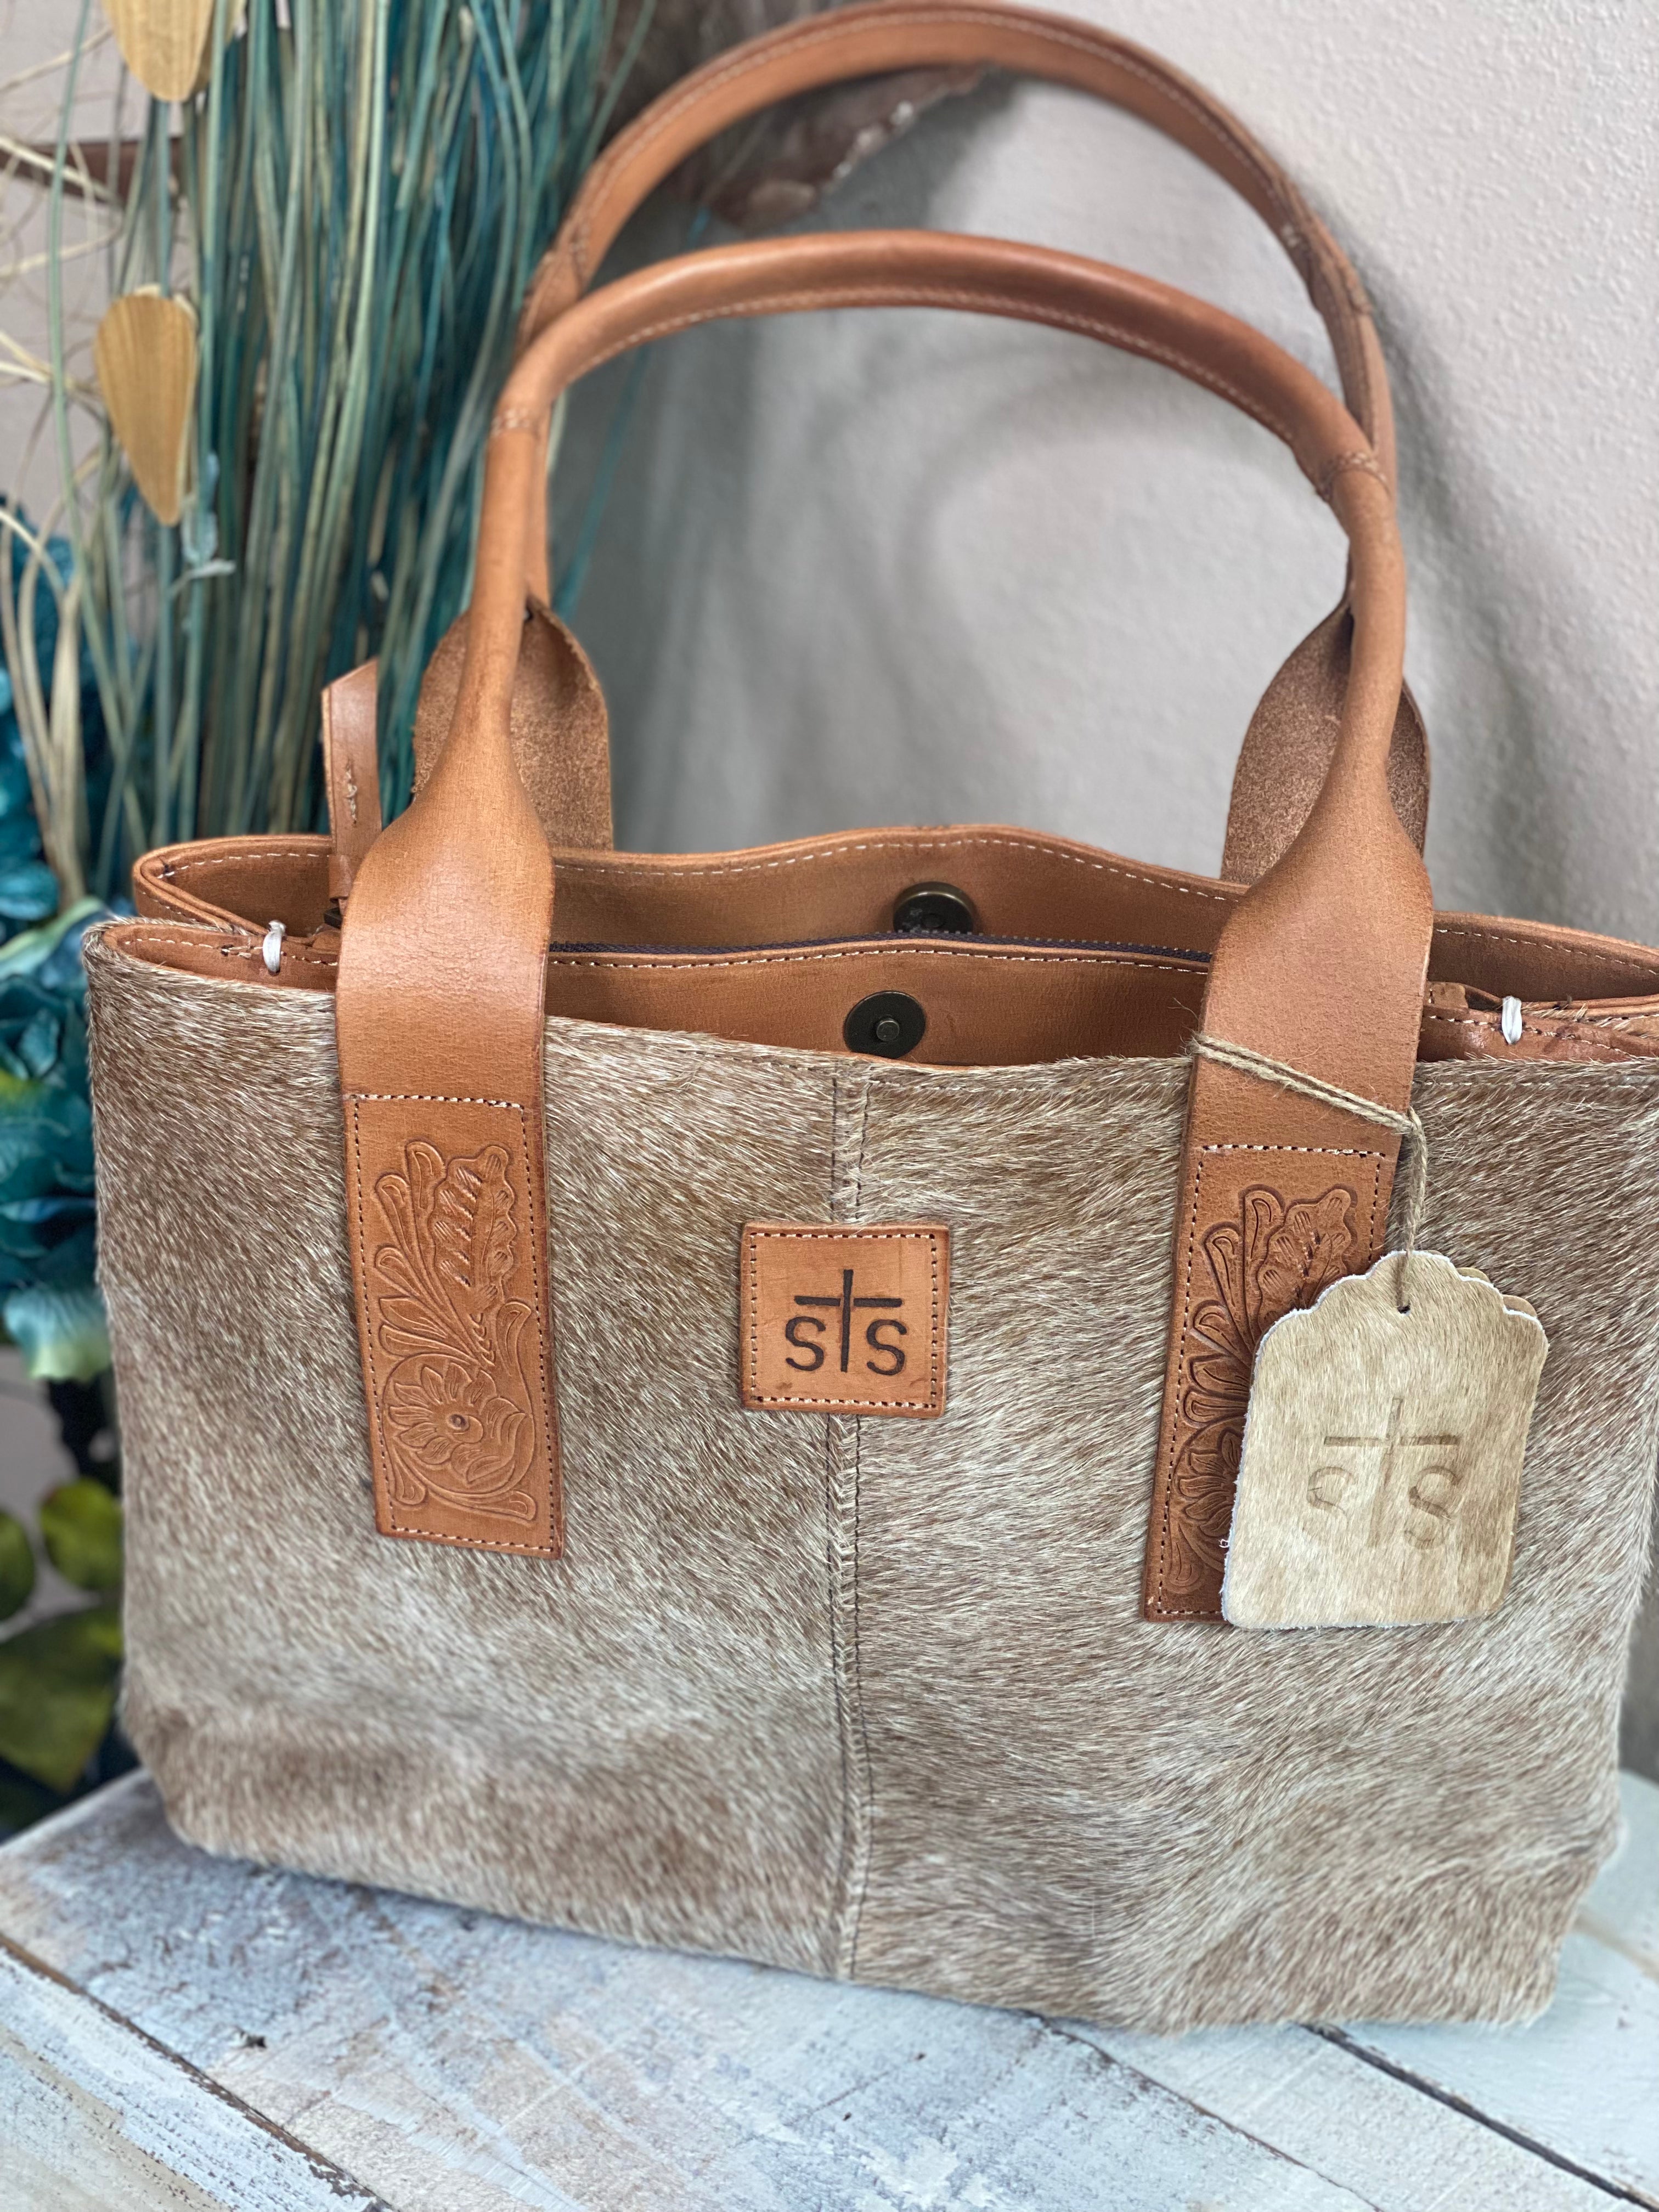 STS Kiyay Tote - Forever Western Boutique